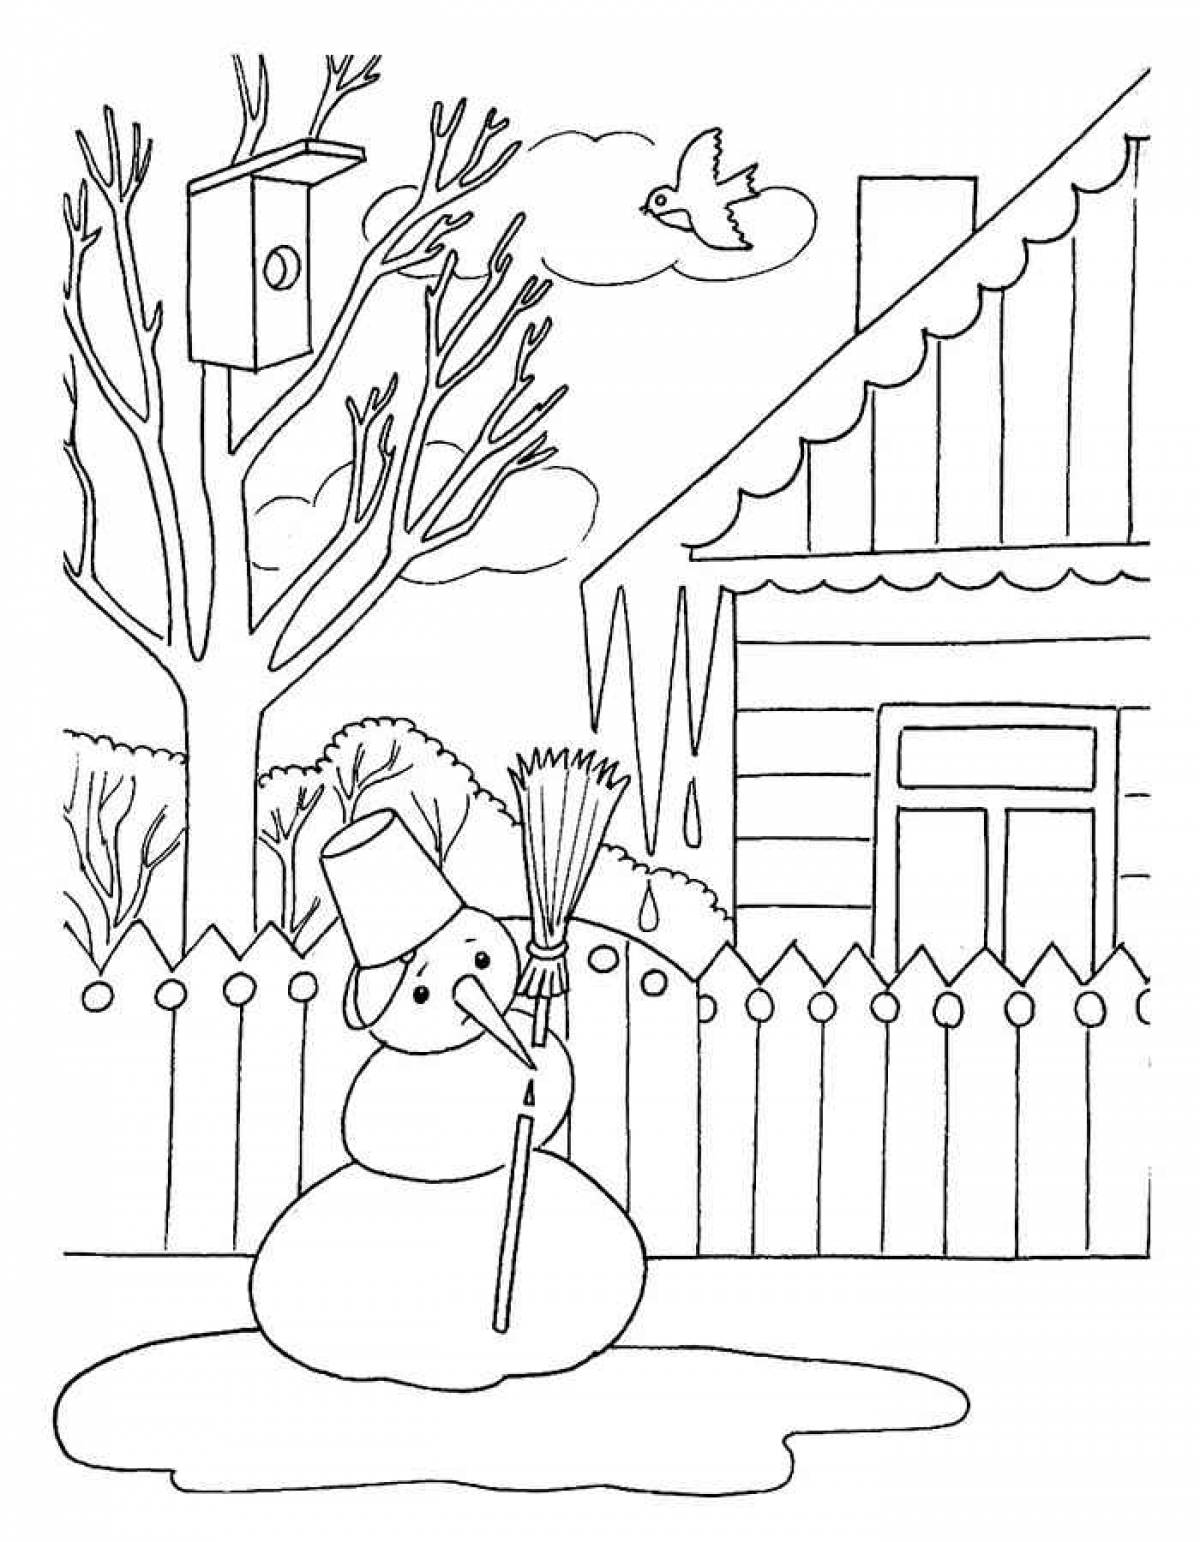 Coloring book for children snowman